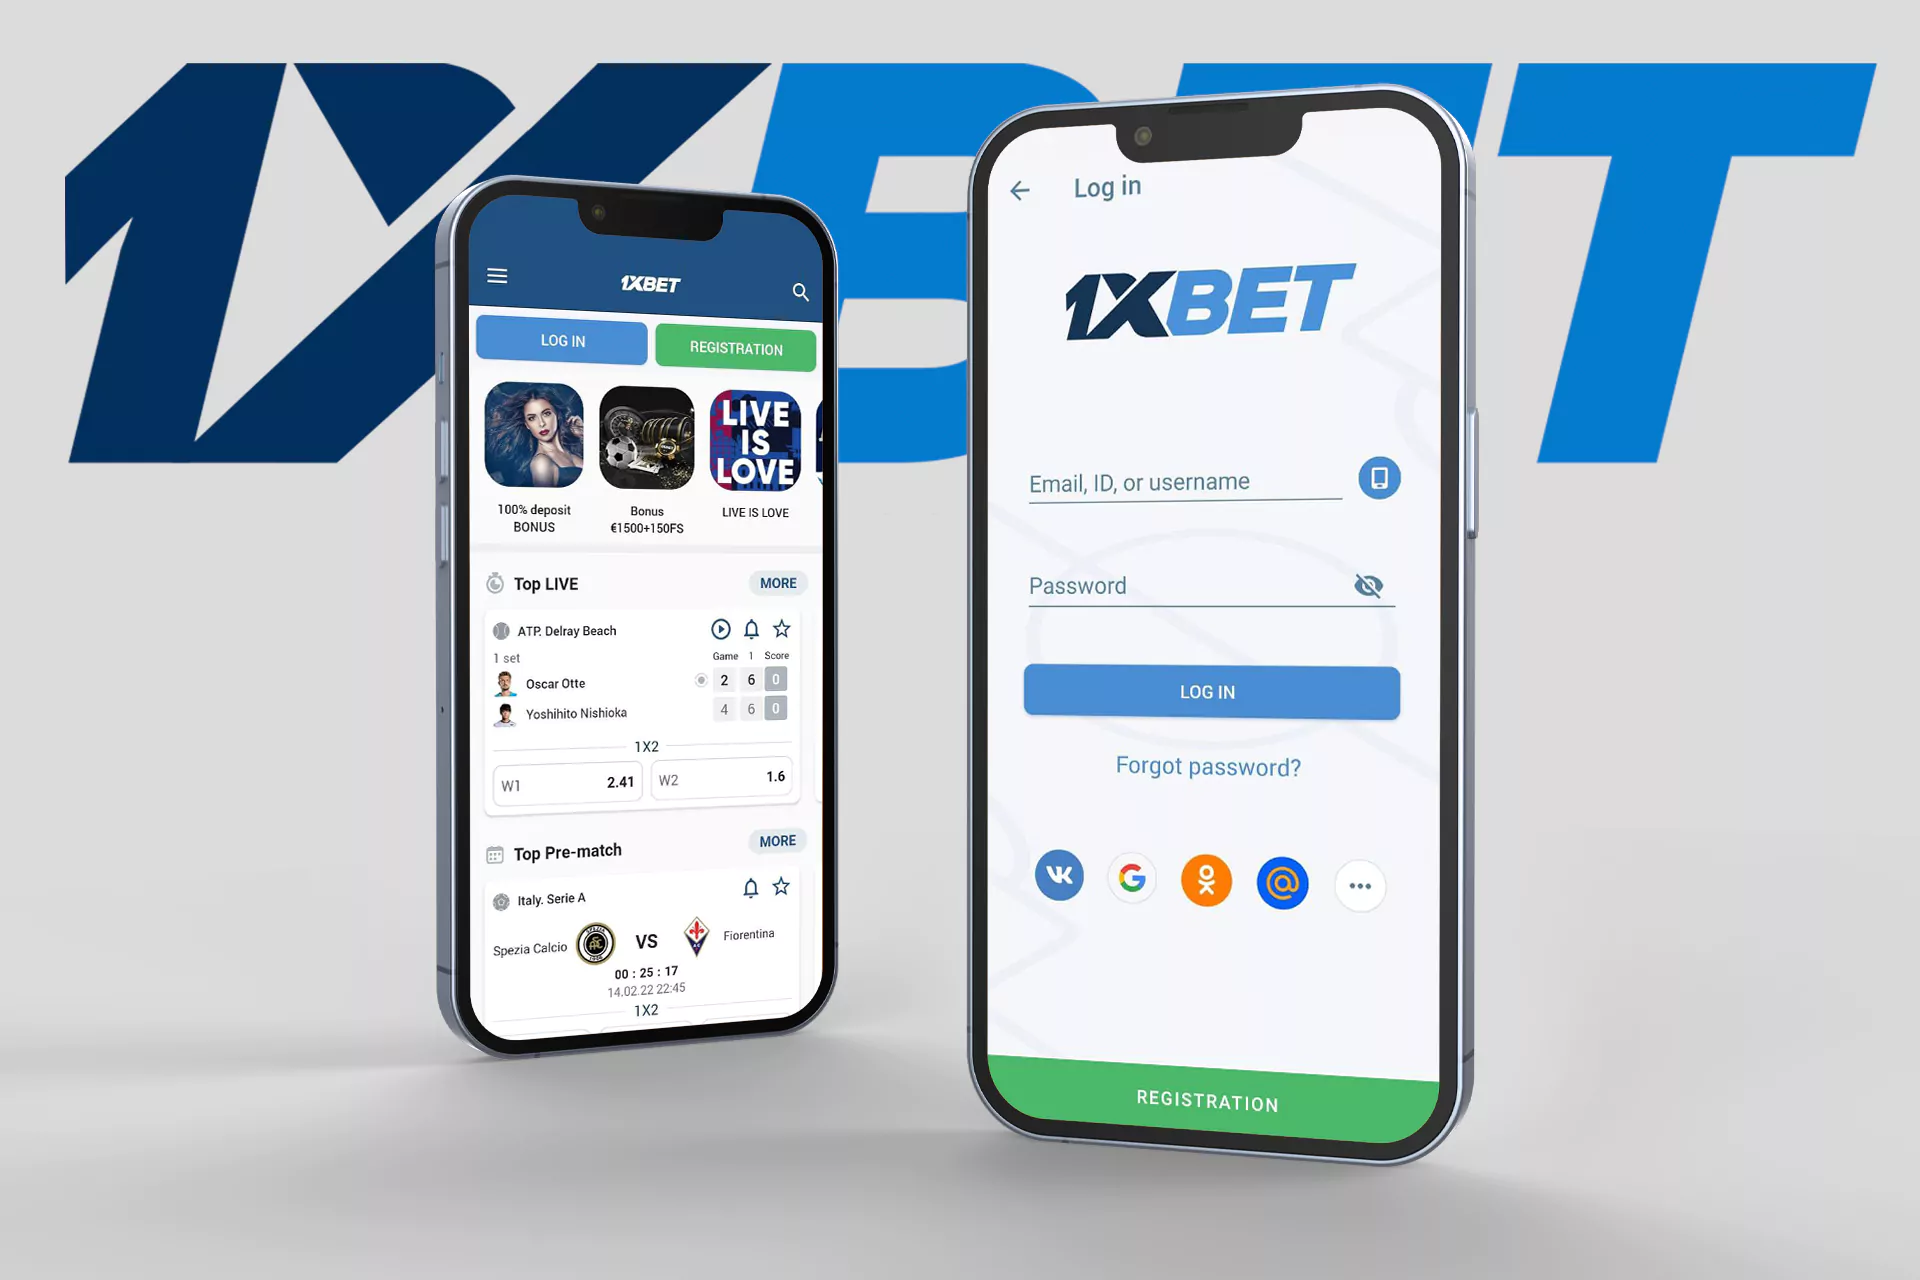 The mobile version of the 1xbet website